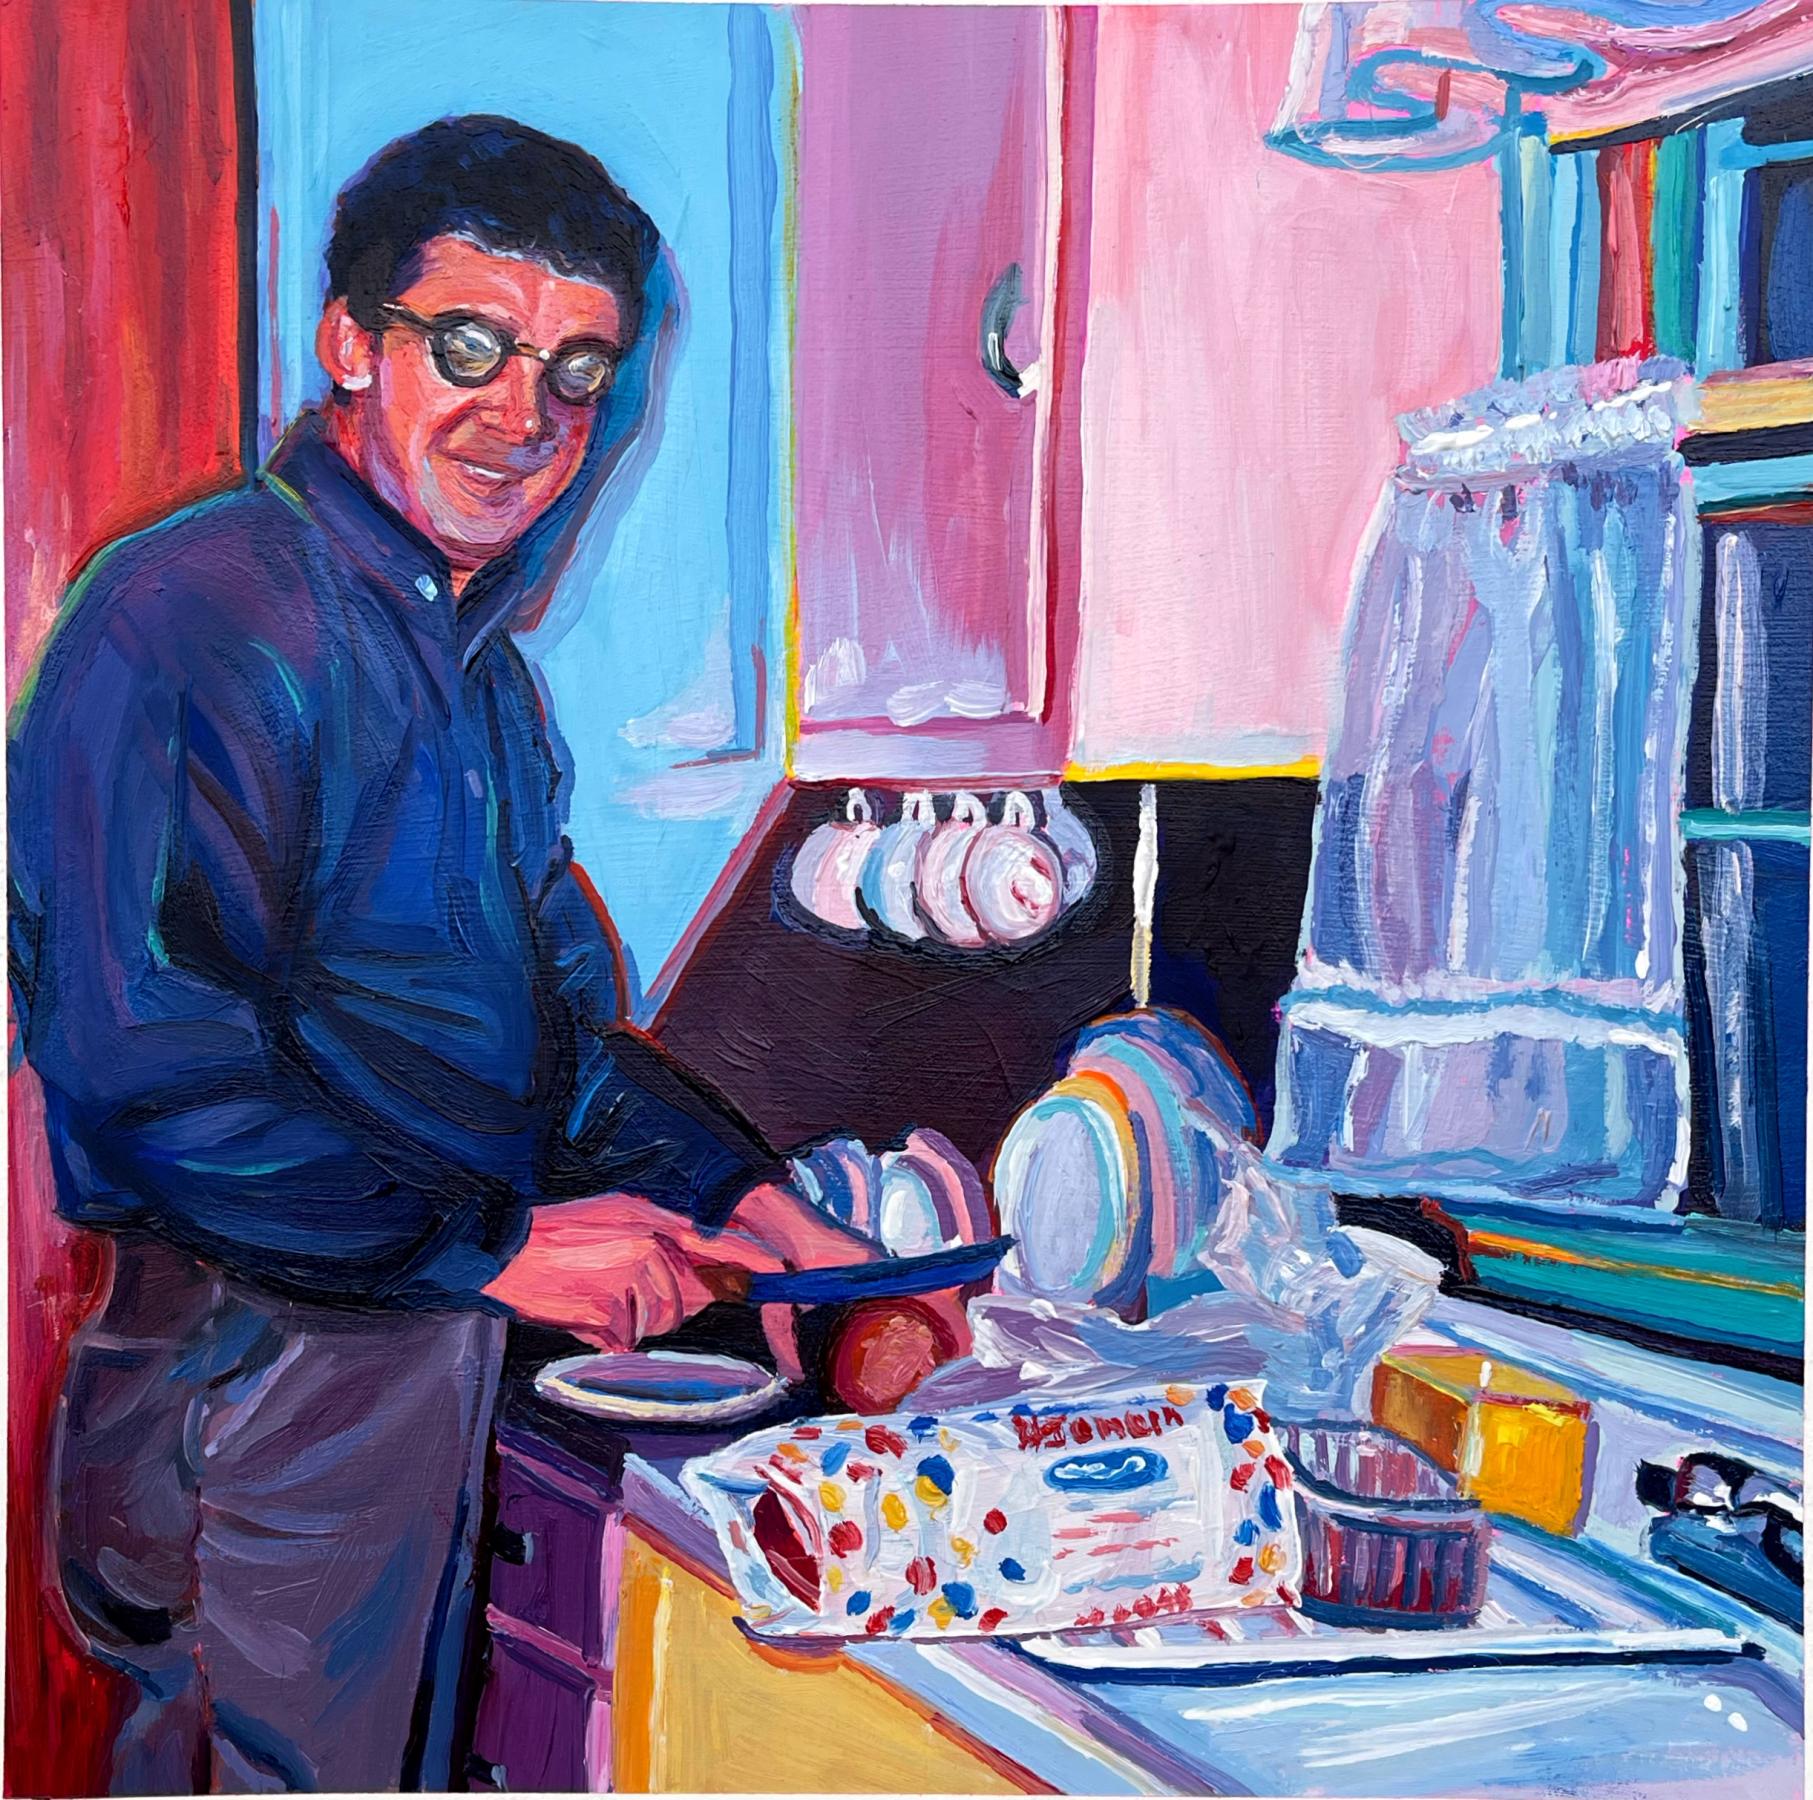 A mid century man preparing a sandwich with wonder bread in his pink and blue kitchen. He's smiling at the camera. 